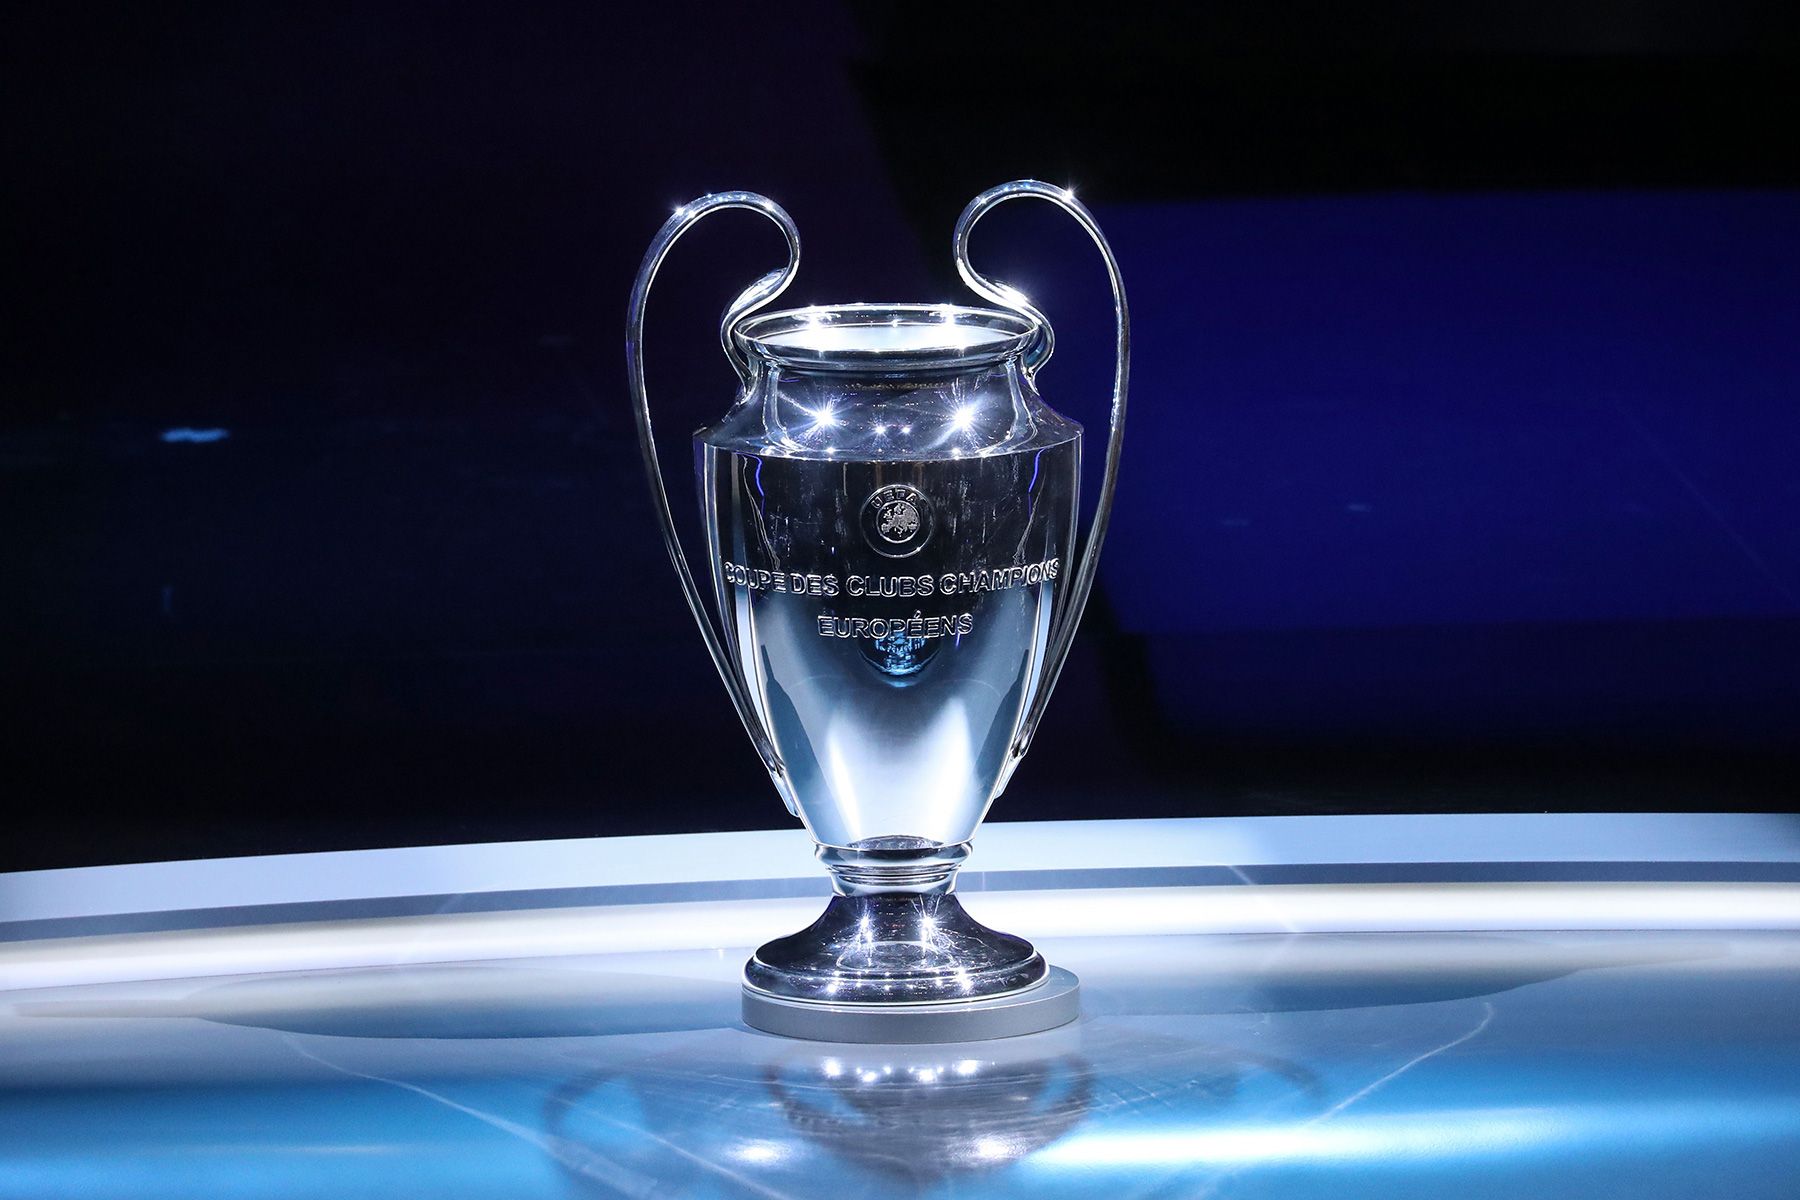 The trophy of the Champions League